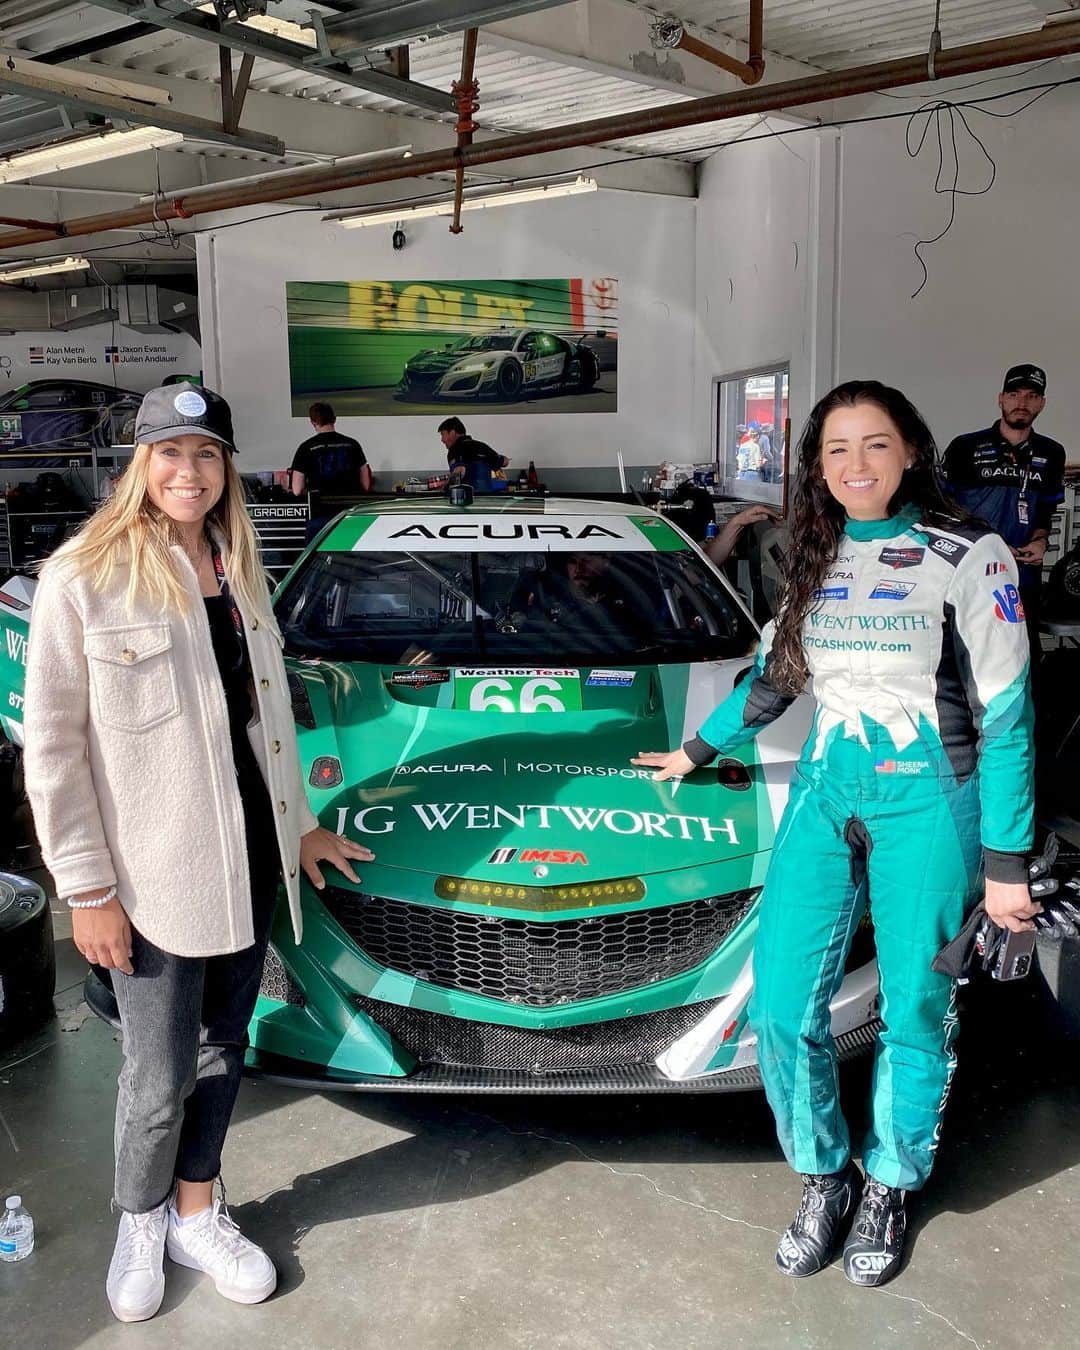 Pernilla Lindbergのインスタグラム：「What an amazing experience to see what’s involved in getting a car, team and drivers ready to race for 24 hours straight at the highest level. So impressive!  It was a real pleasure to meet the @gradientracing team and @sheenamonk_  @katherineracing. Both are avid golfers and the @lpga_tour hosted them at our opening event of the year in Orlando. I want to thank them both and congratulate them on a great performance yesterday. It was very eye opening to see what’s involved in the lead up to the biggest race of the year and get to witness it up close!」